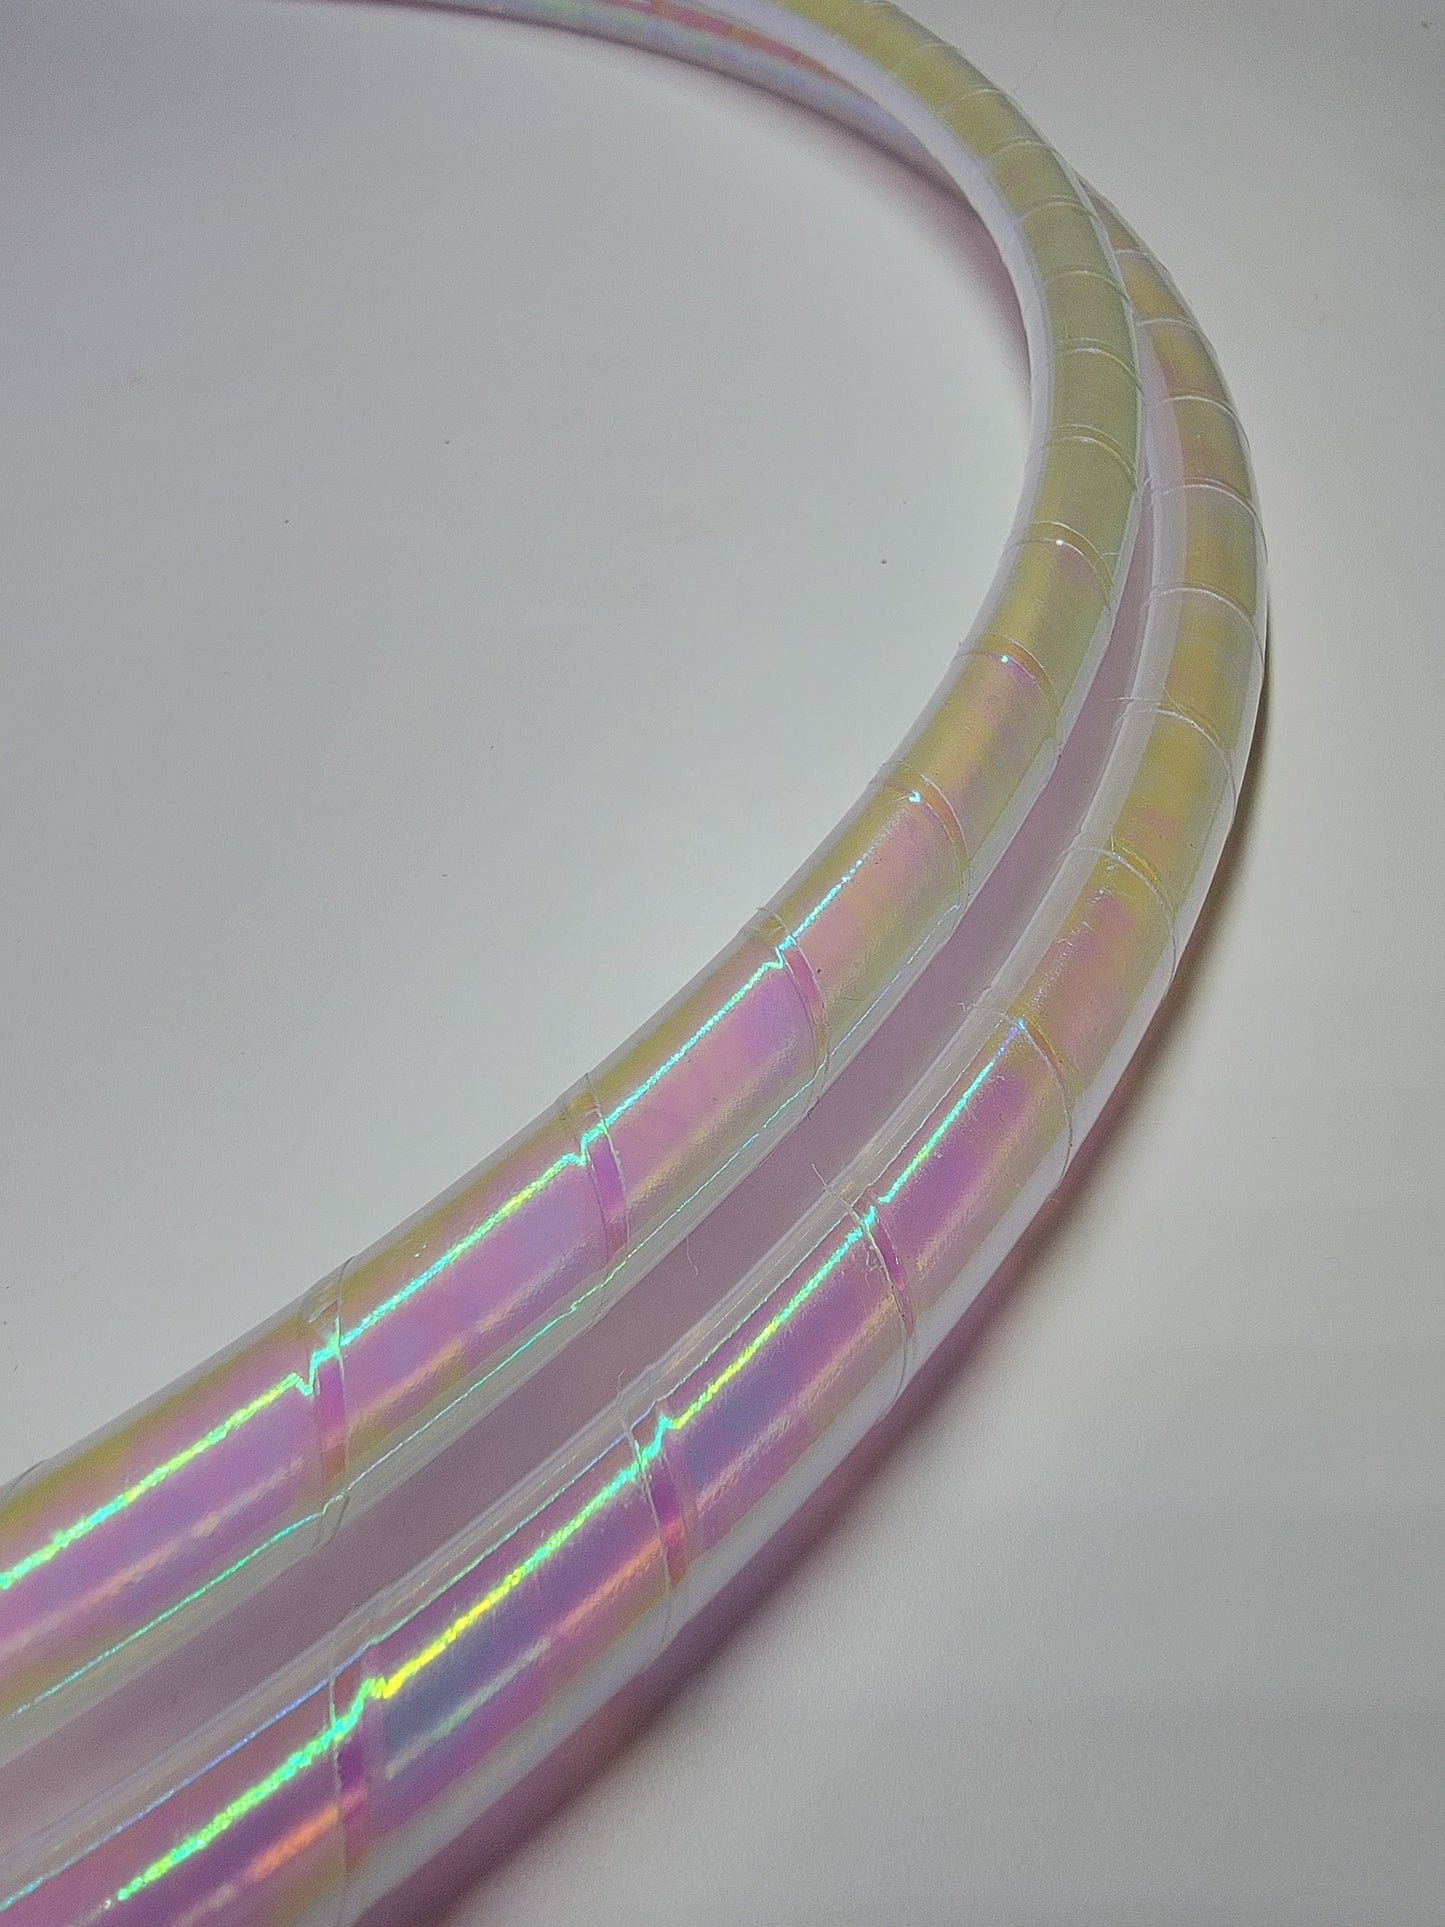 White Pearlescent Taped Hula Hoop